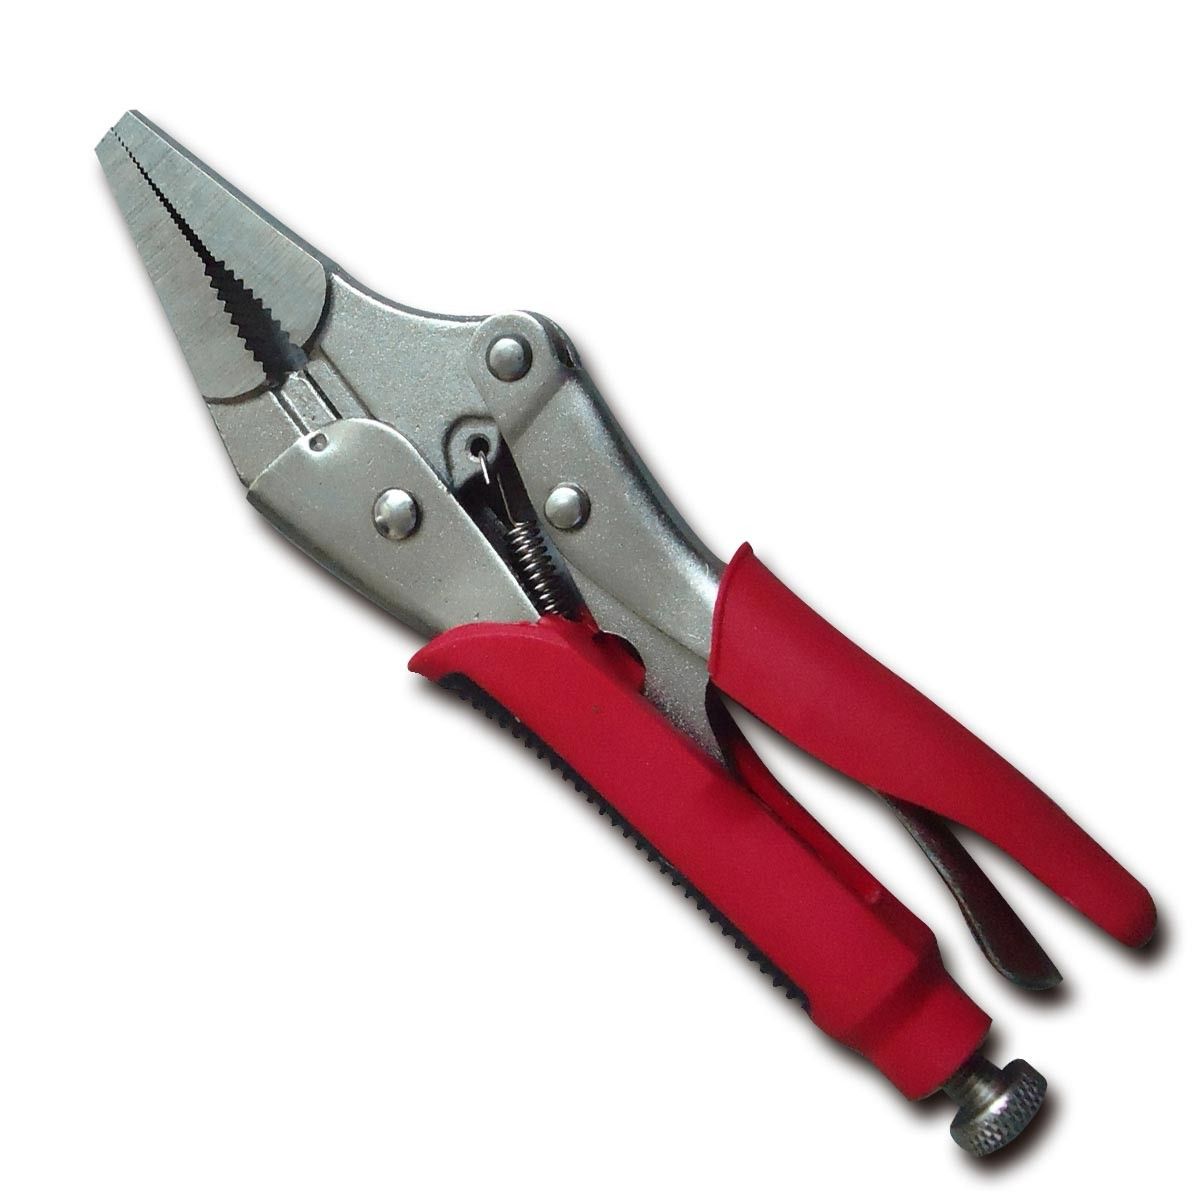 American style locking plier with long nose, 9 Inch (DL-15A-9)